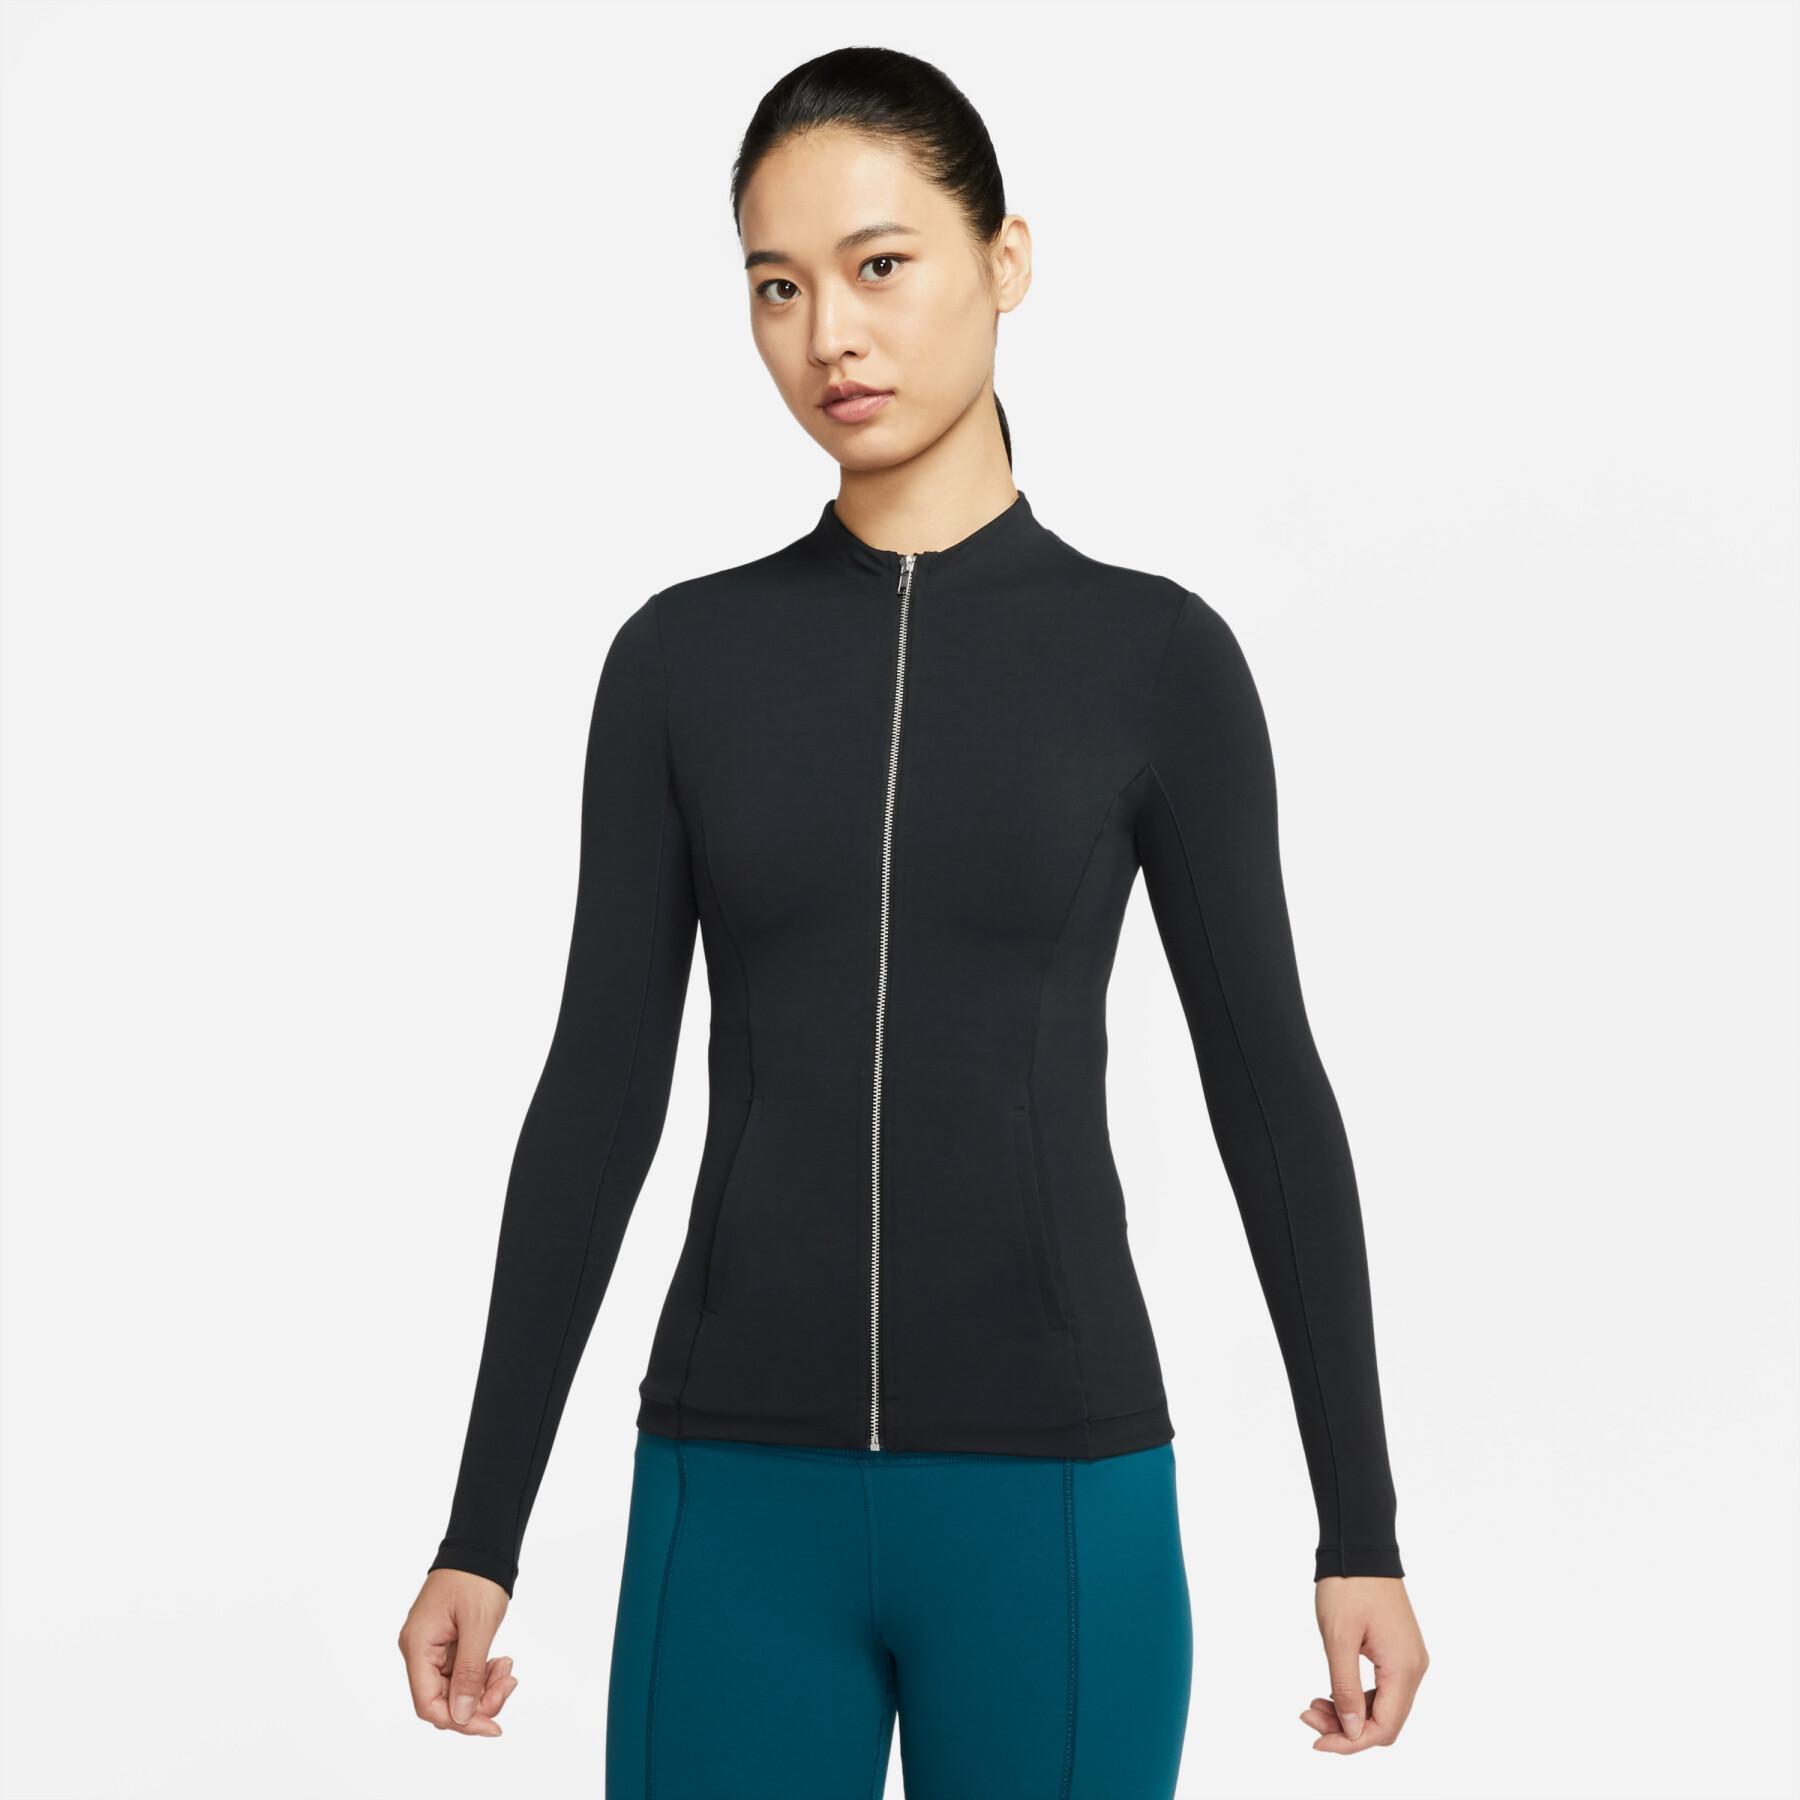 Chaqueta de chándal para mujer Nike dynamic fit luxe fttd